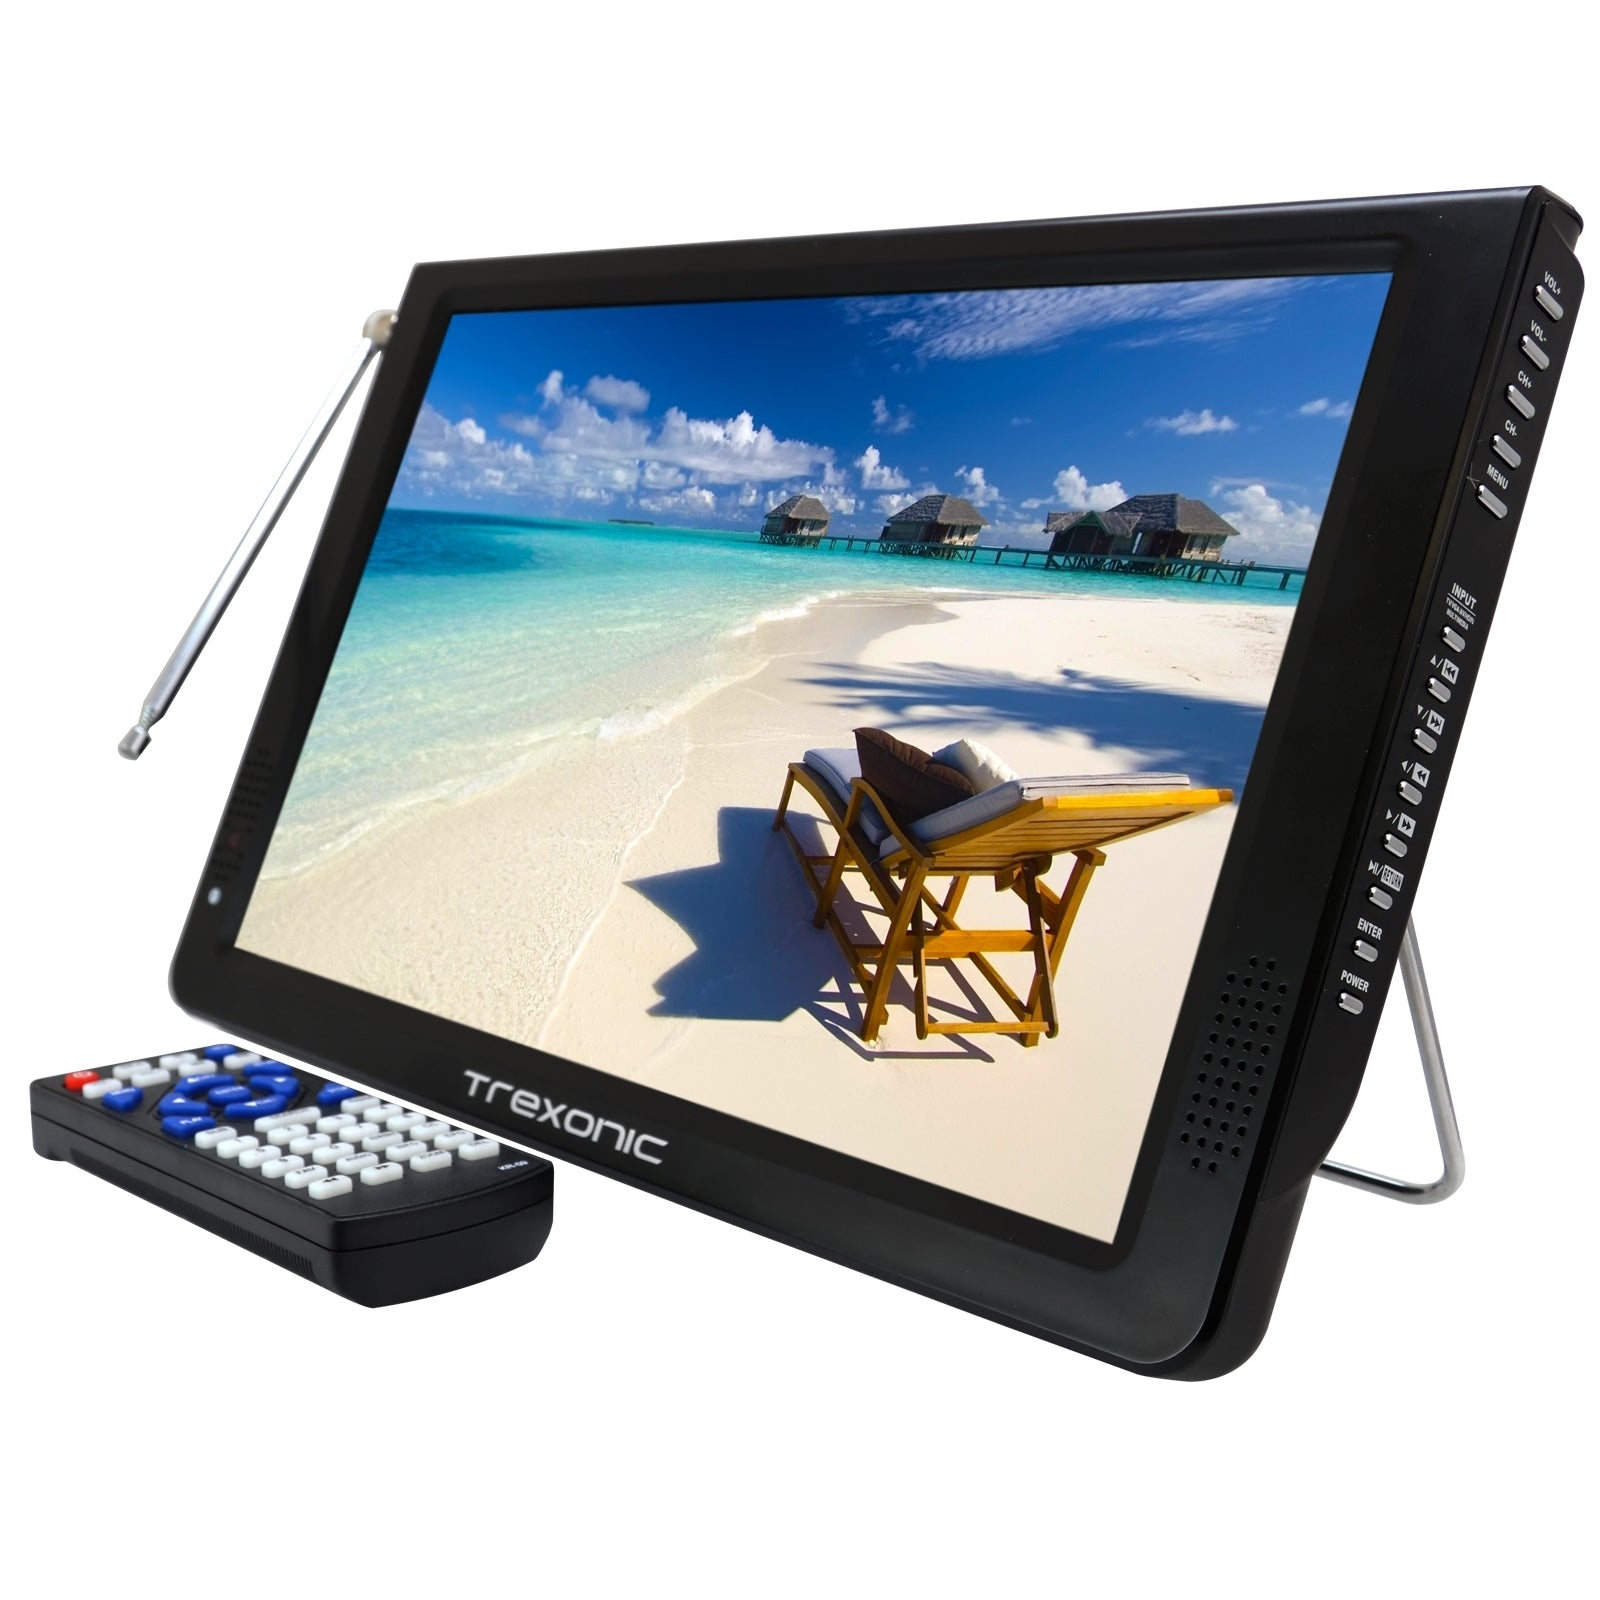 Trexonic Ultra Lightweight Rechargeable Widescreen 12" LED Portable TV with HDMI, SD, MMC, USB, VGA, Headphone Jack, AV Inputs and Output and Built-in Digital Tuner and Detachable Antenna - Homreo